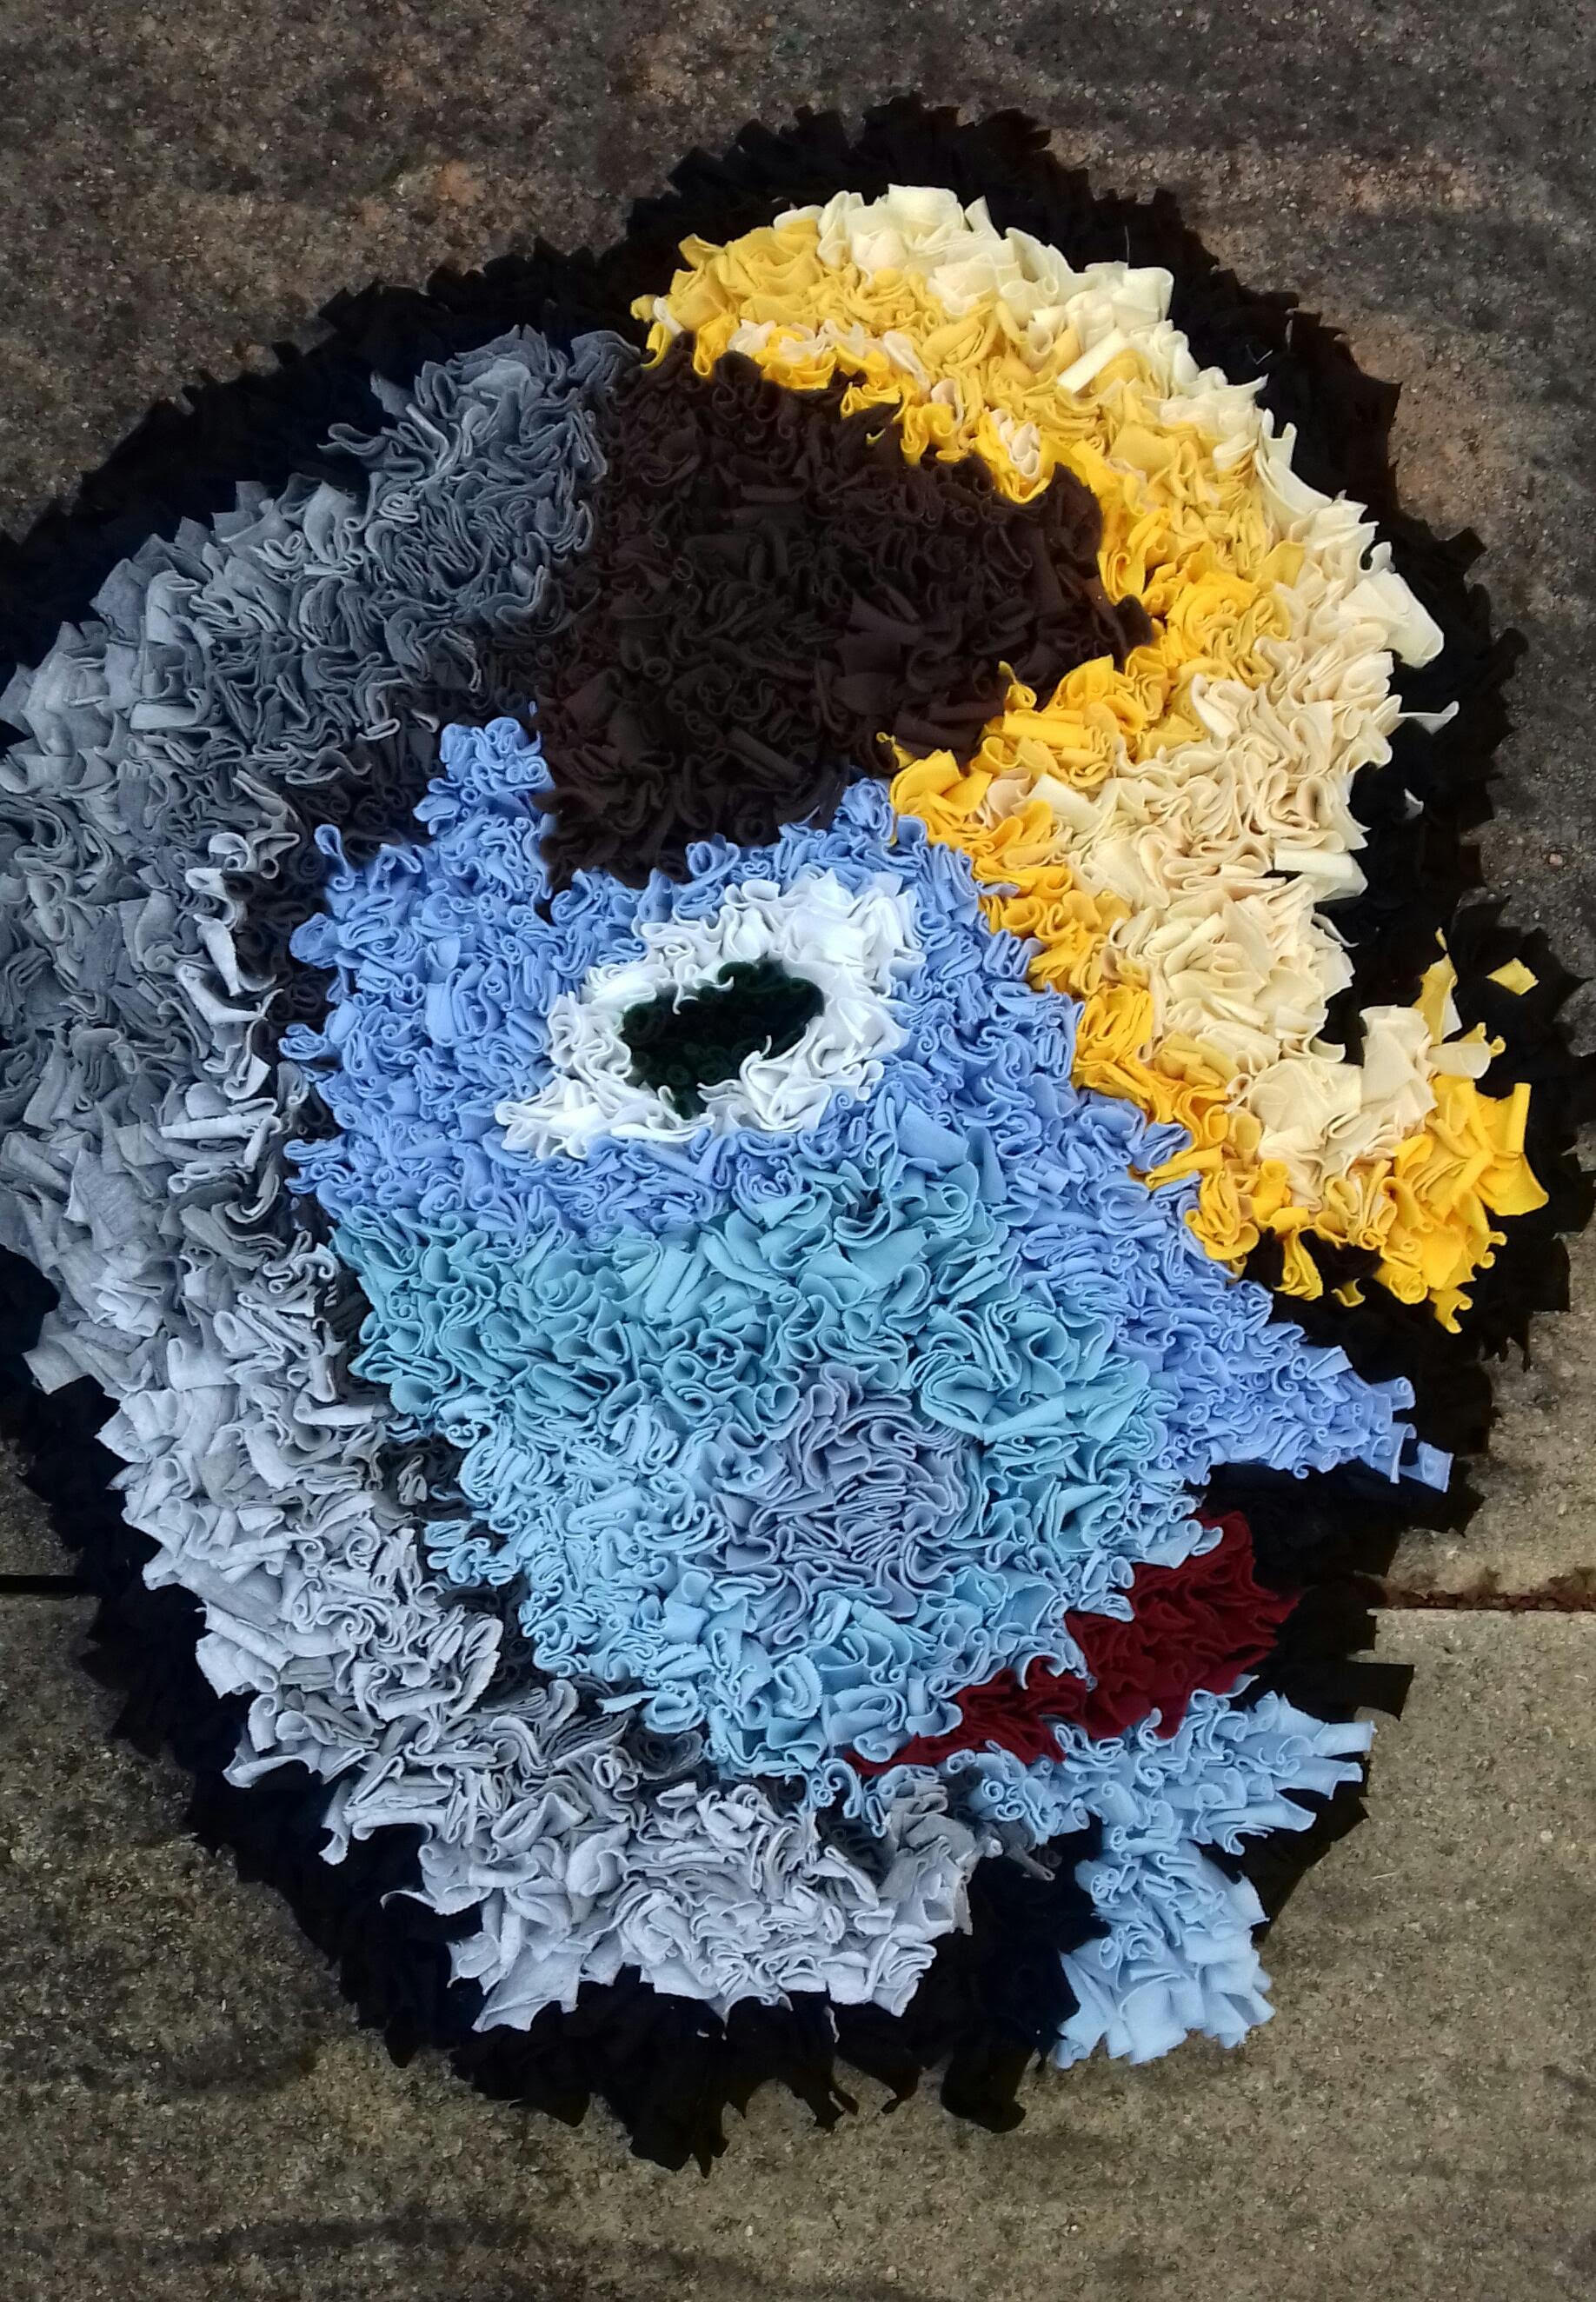 Picasso inspired rag rug head made using old t-shirts